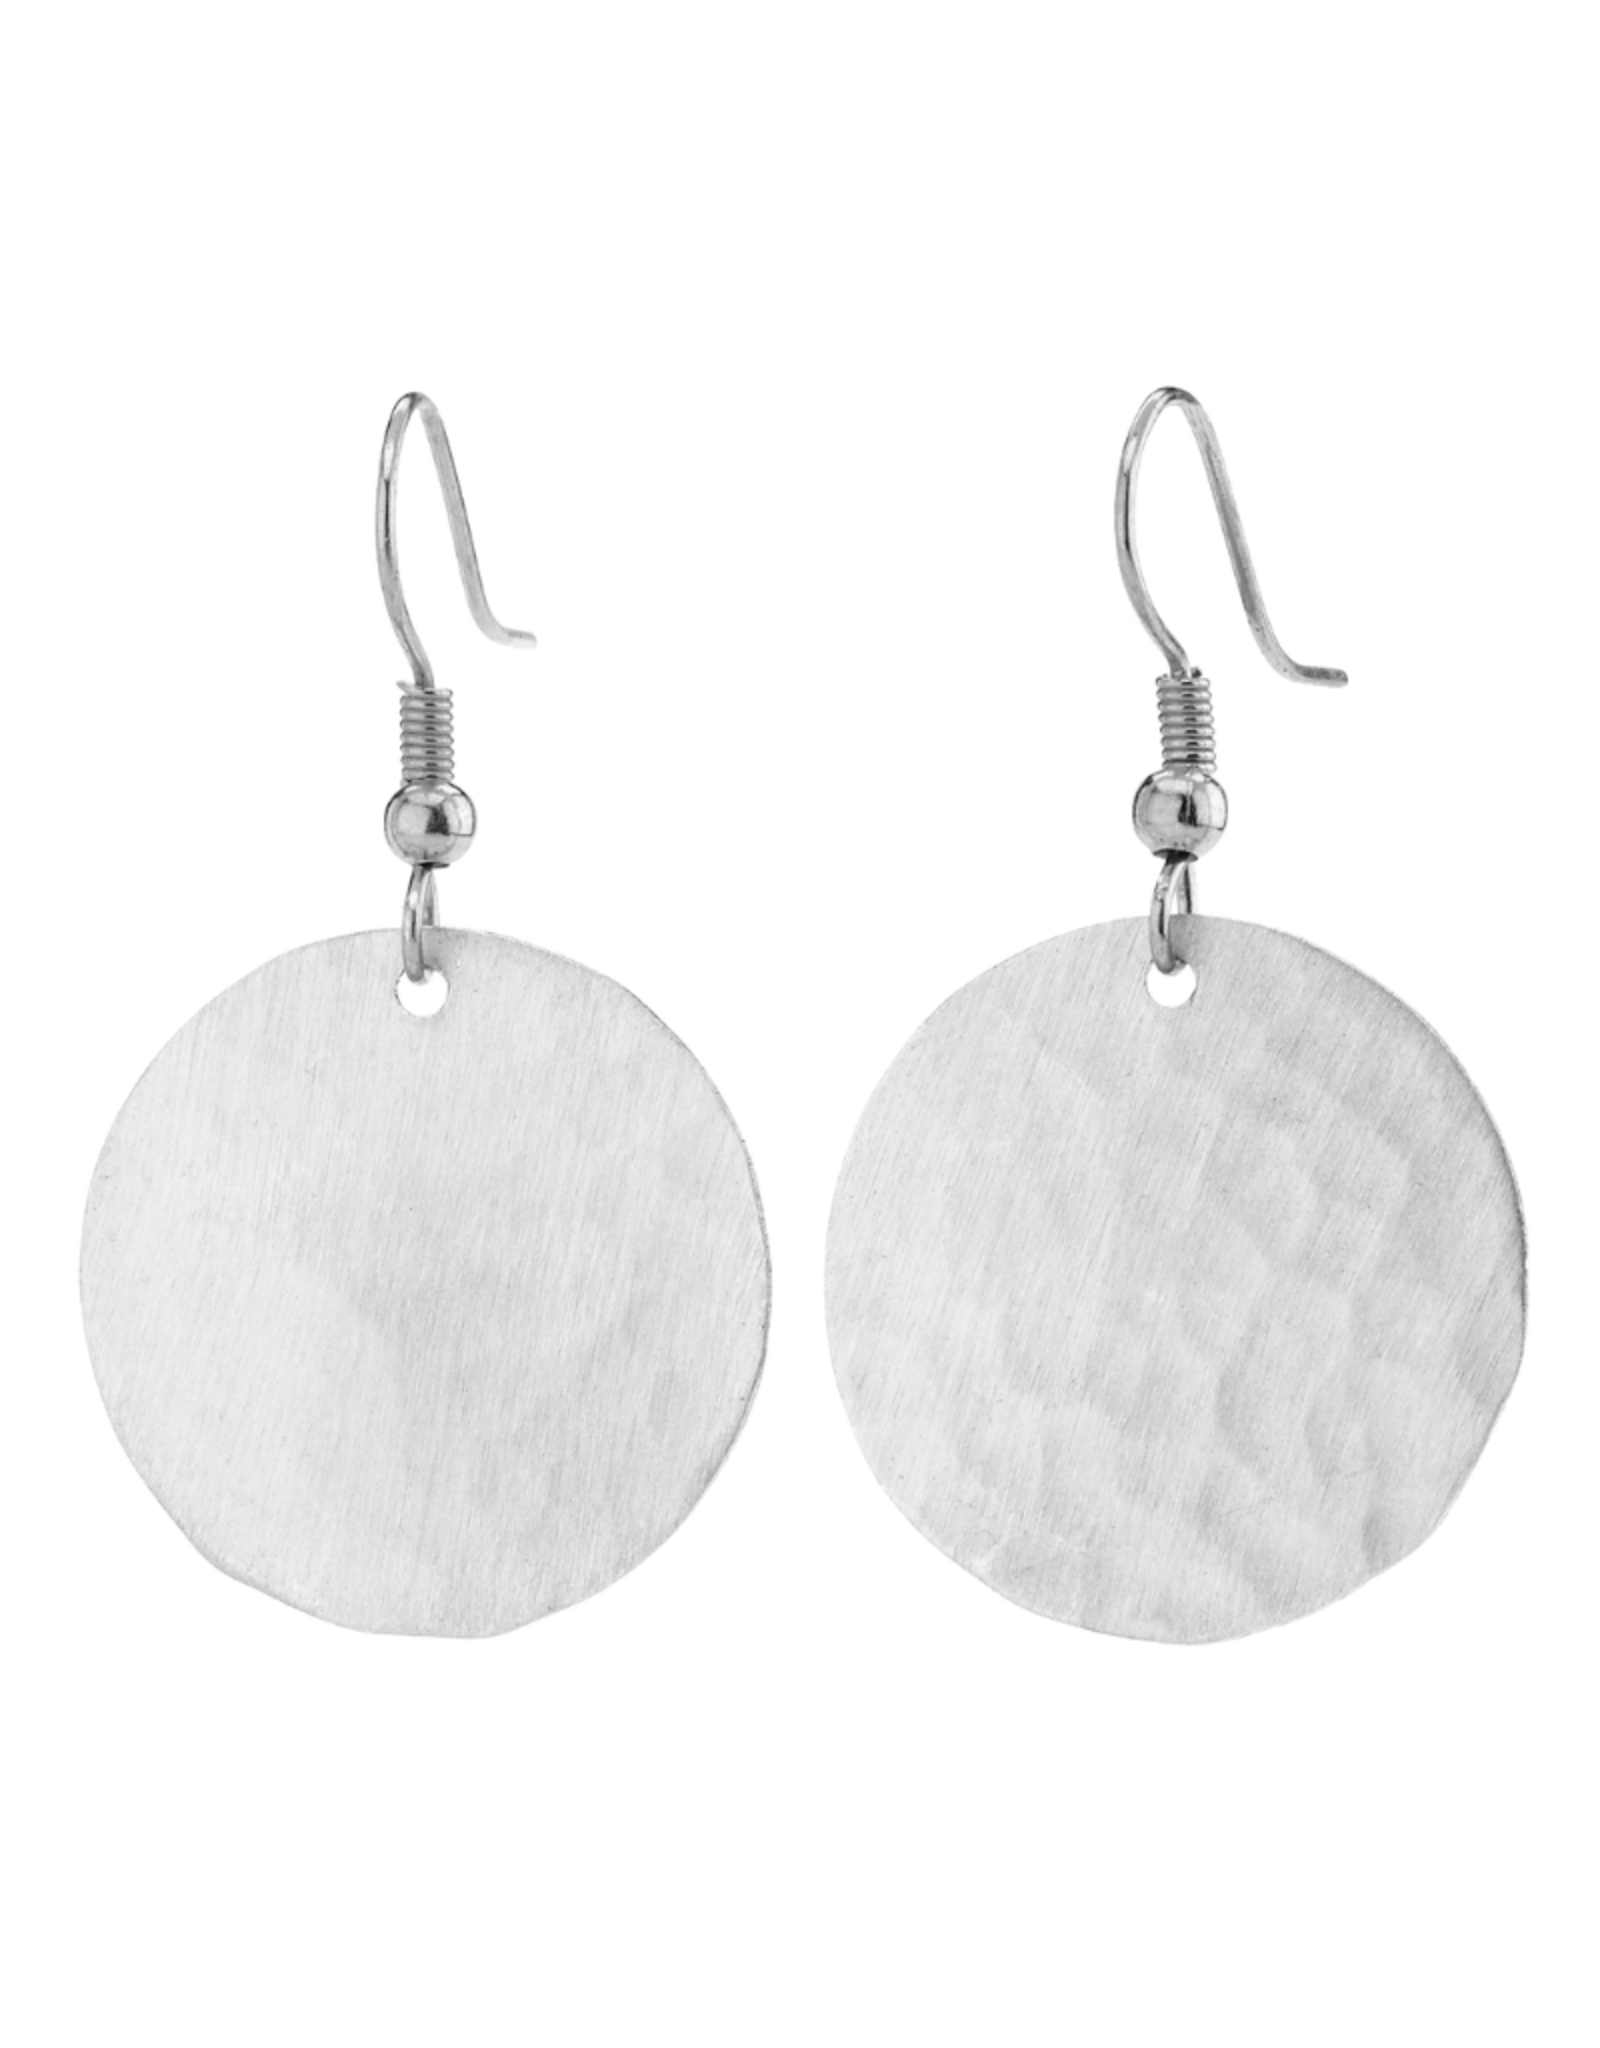 Faire/Island Designs EARRINGS-HAMMERED COIN